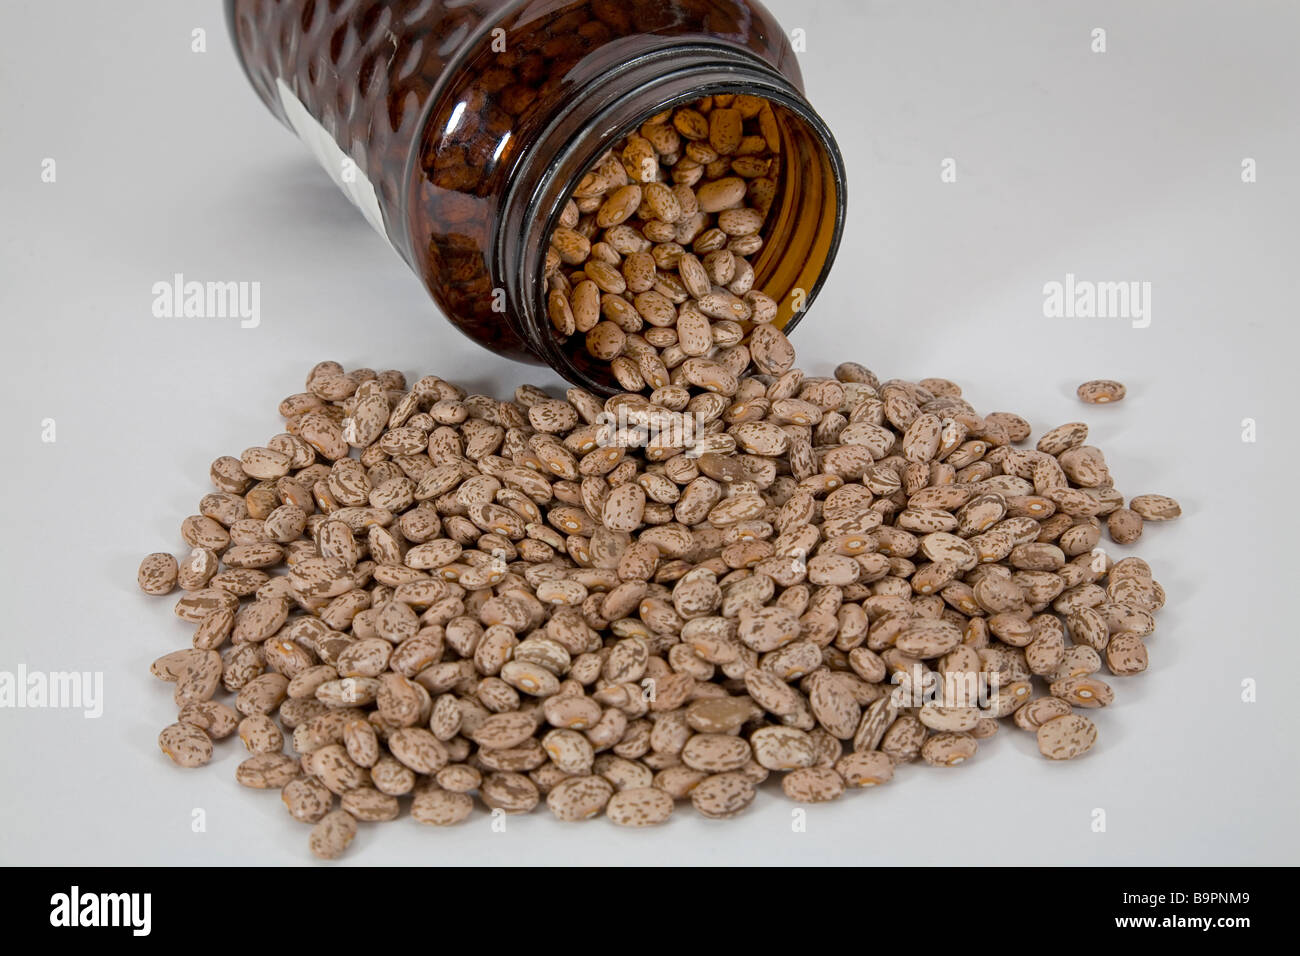 Beans pinto beans lentils legume being stored in a jar Stock Photo